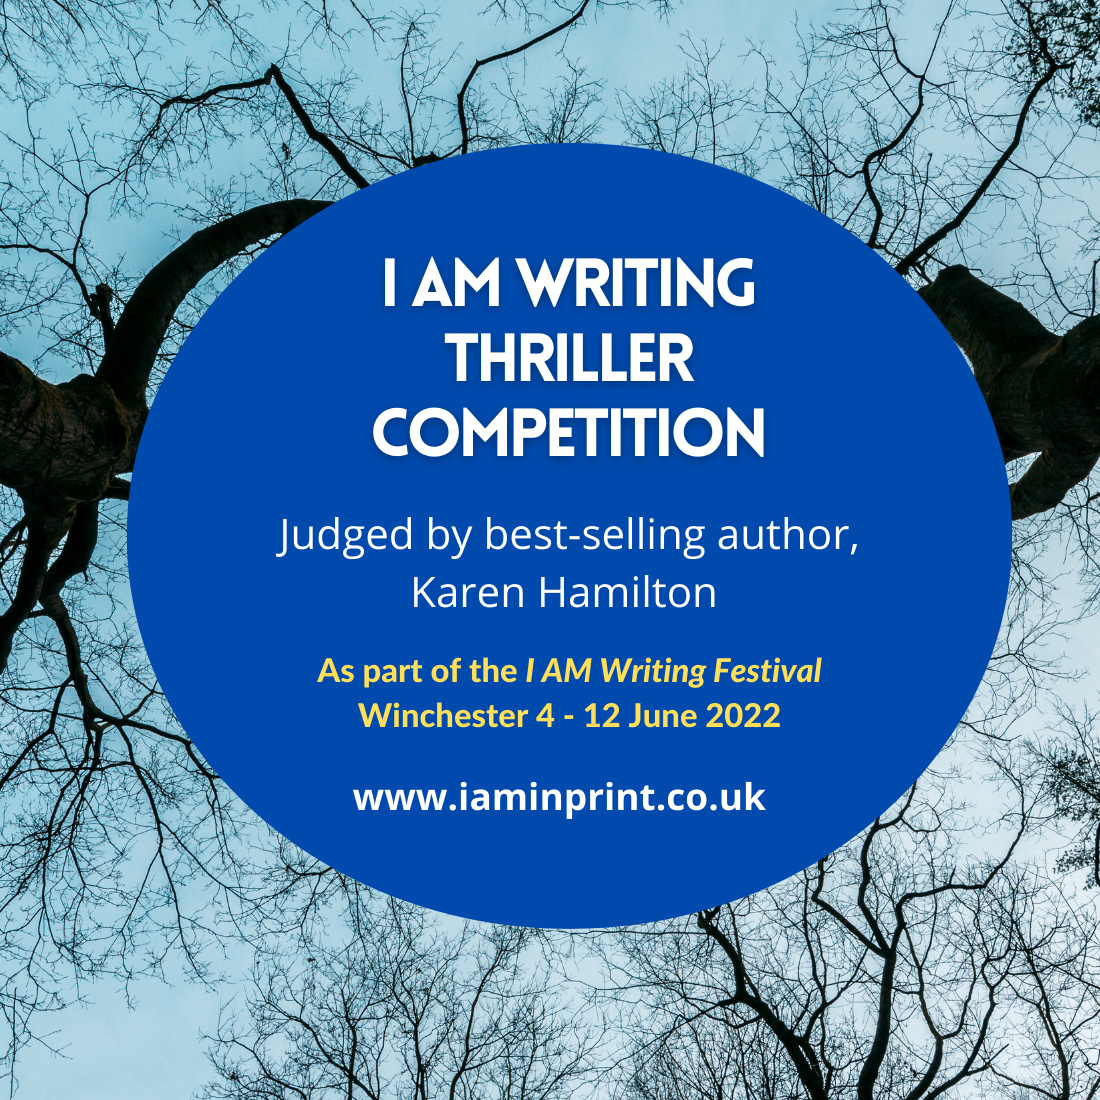 I Am Writing Thriller Competition 2022. As part of the I Am Writing Festival in Winchester. Judged by Karen Hamilton